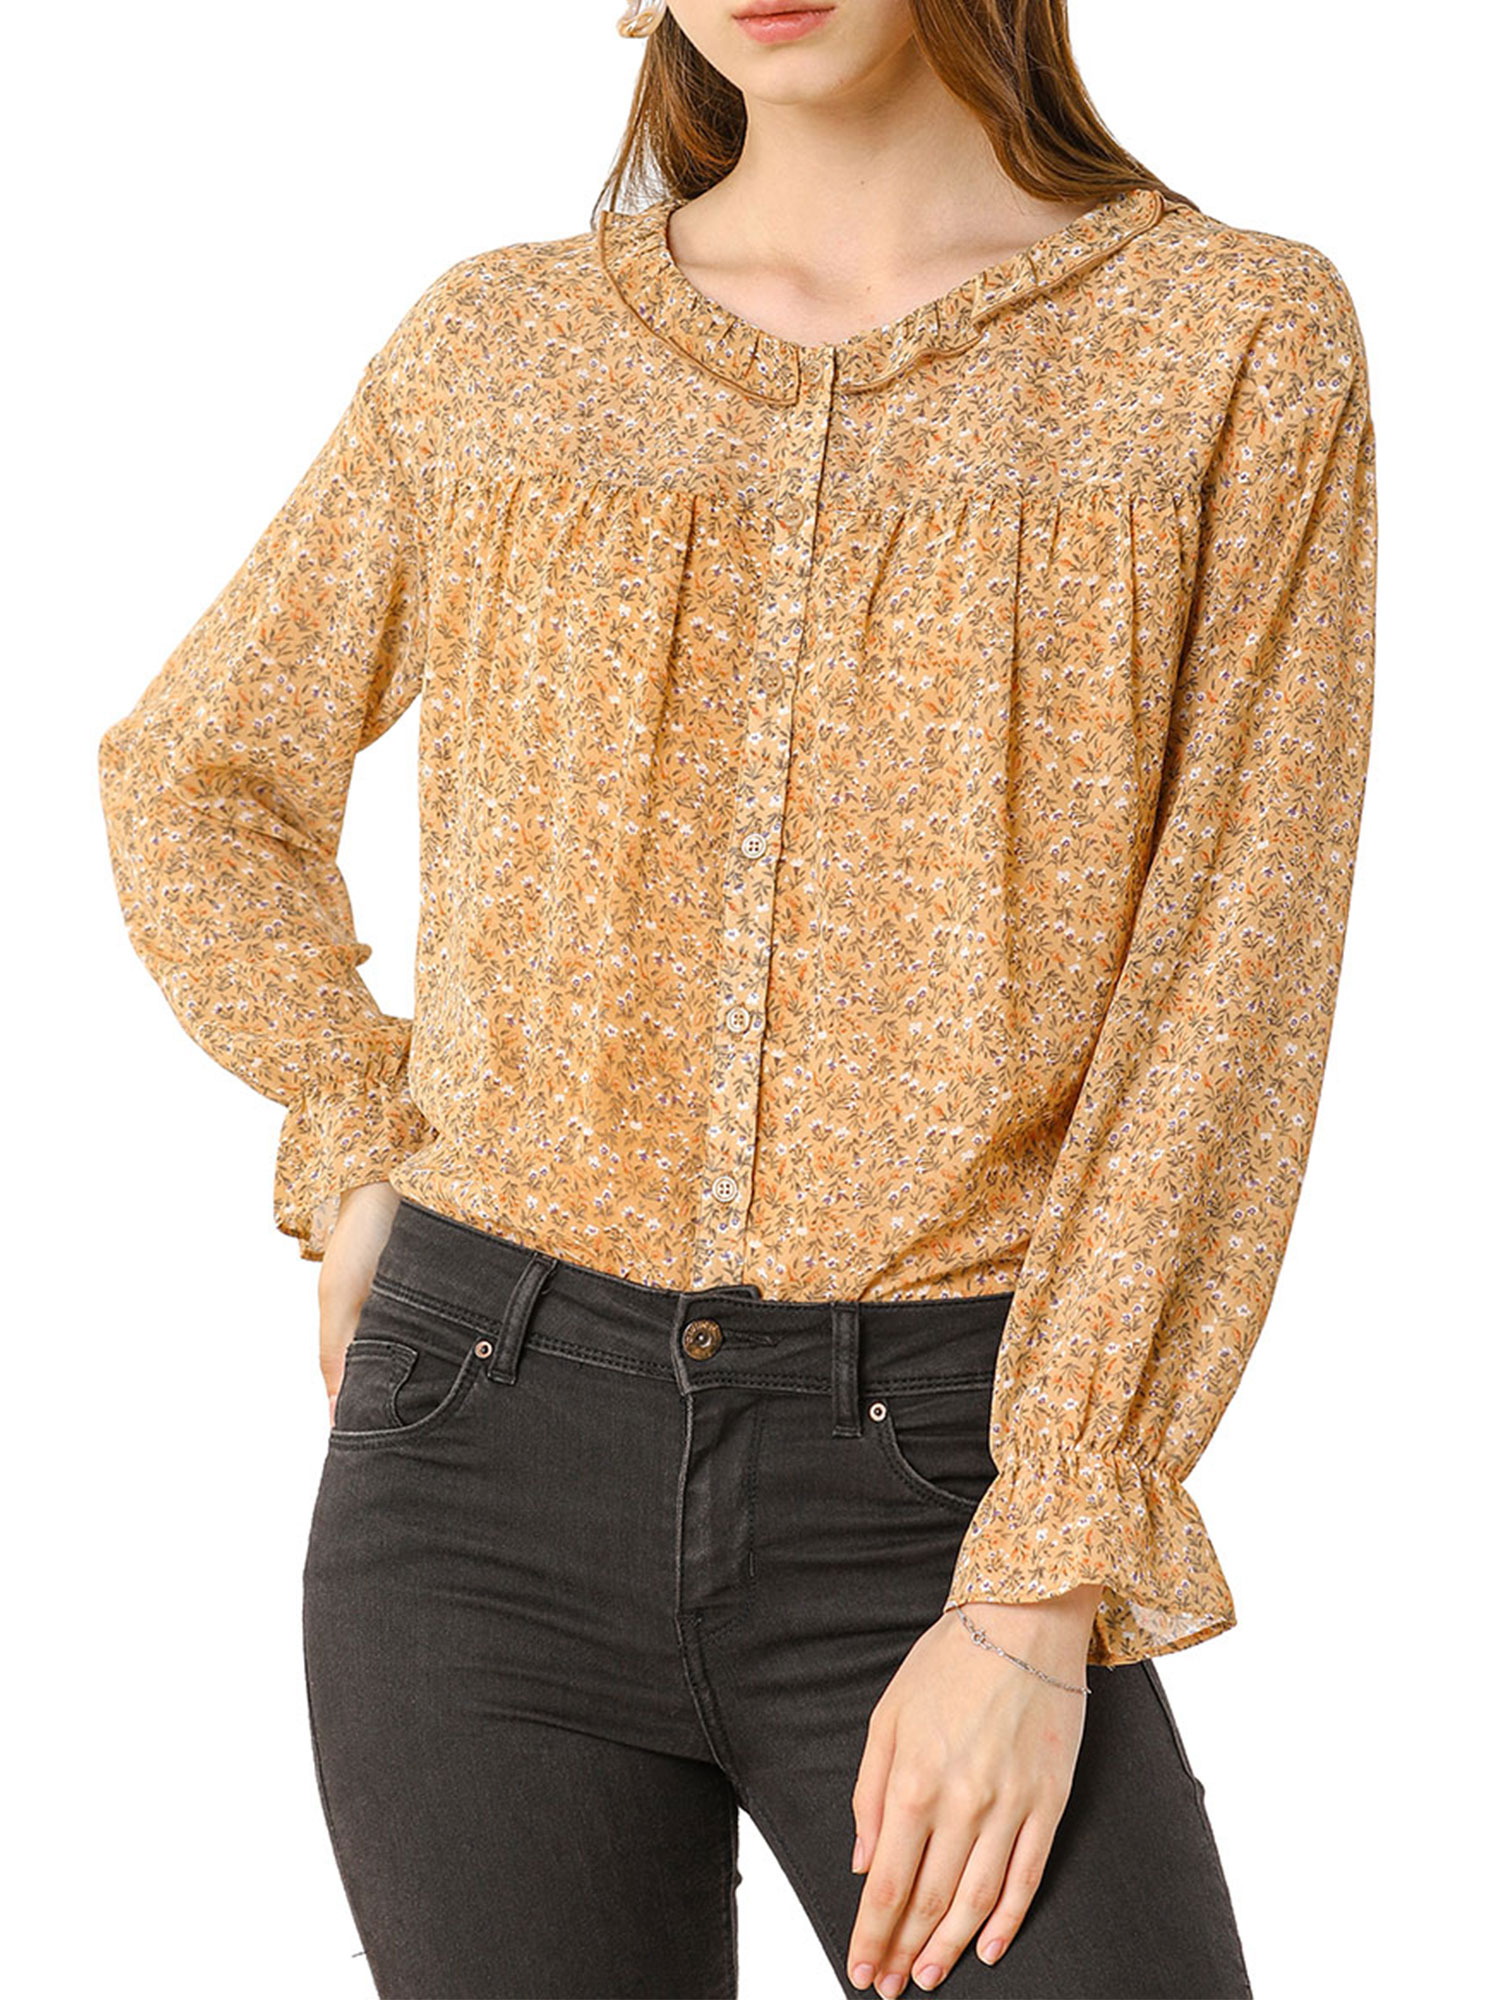 MODA NOVA Junior's Ditsy Floral Button up Long Sleeve Blouse Yellow XS - image 1 of 5